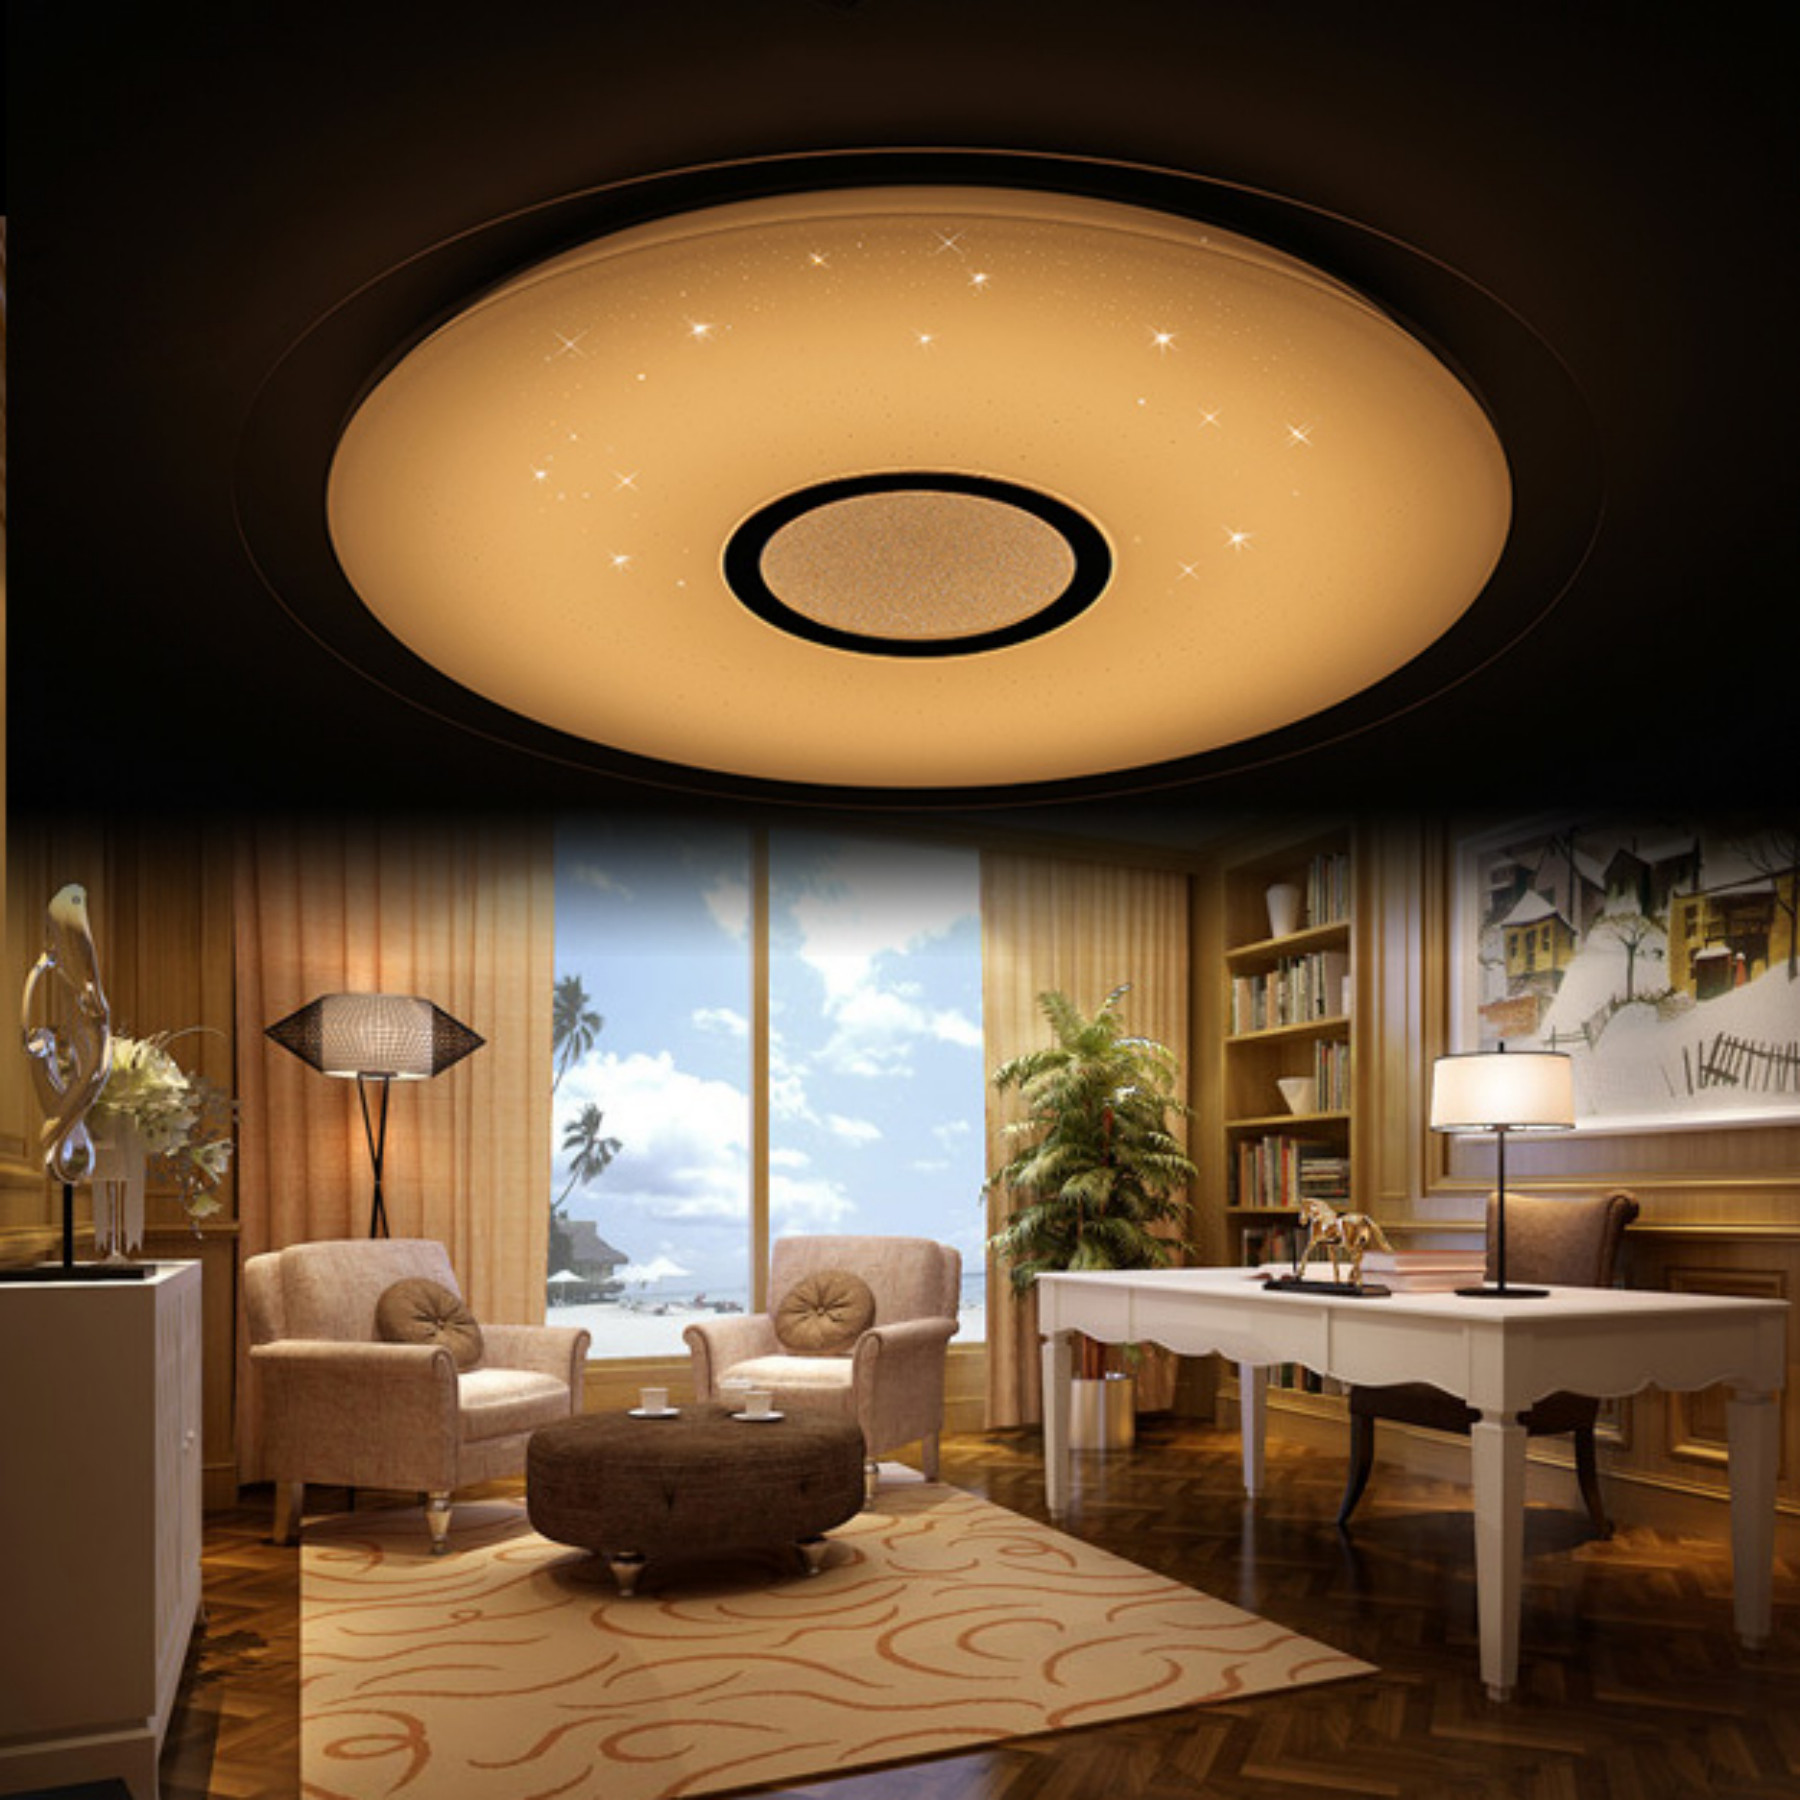 Smart Stylish Remote Control Ceiling Light , Wireless Light Fixtures For Ceilings